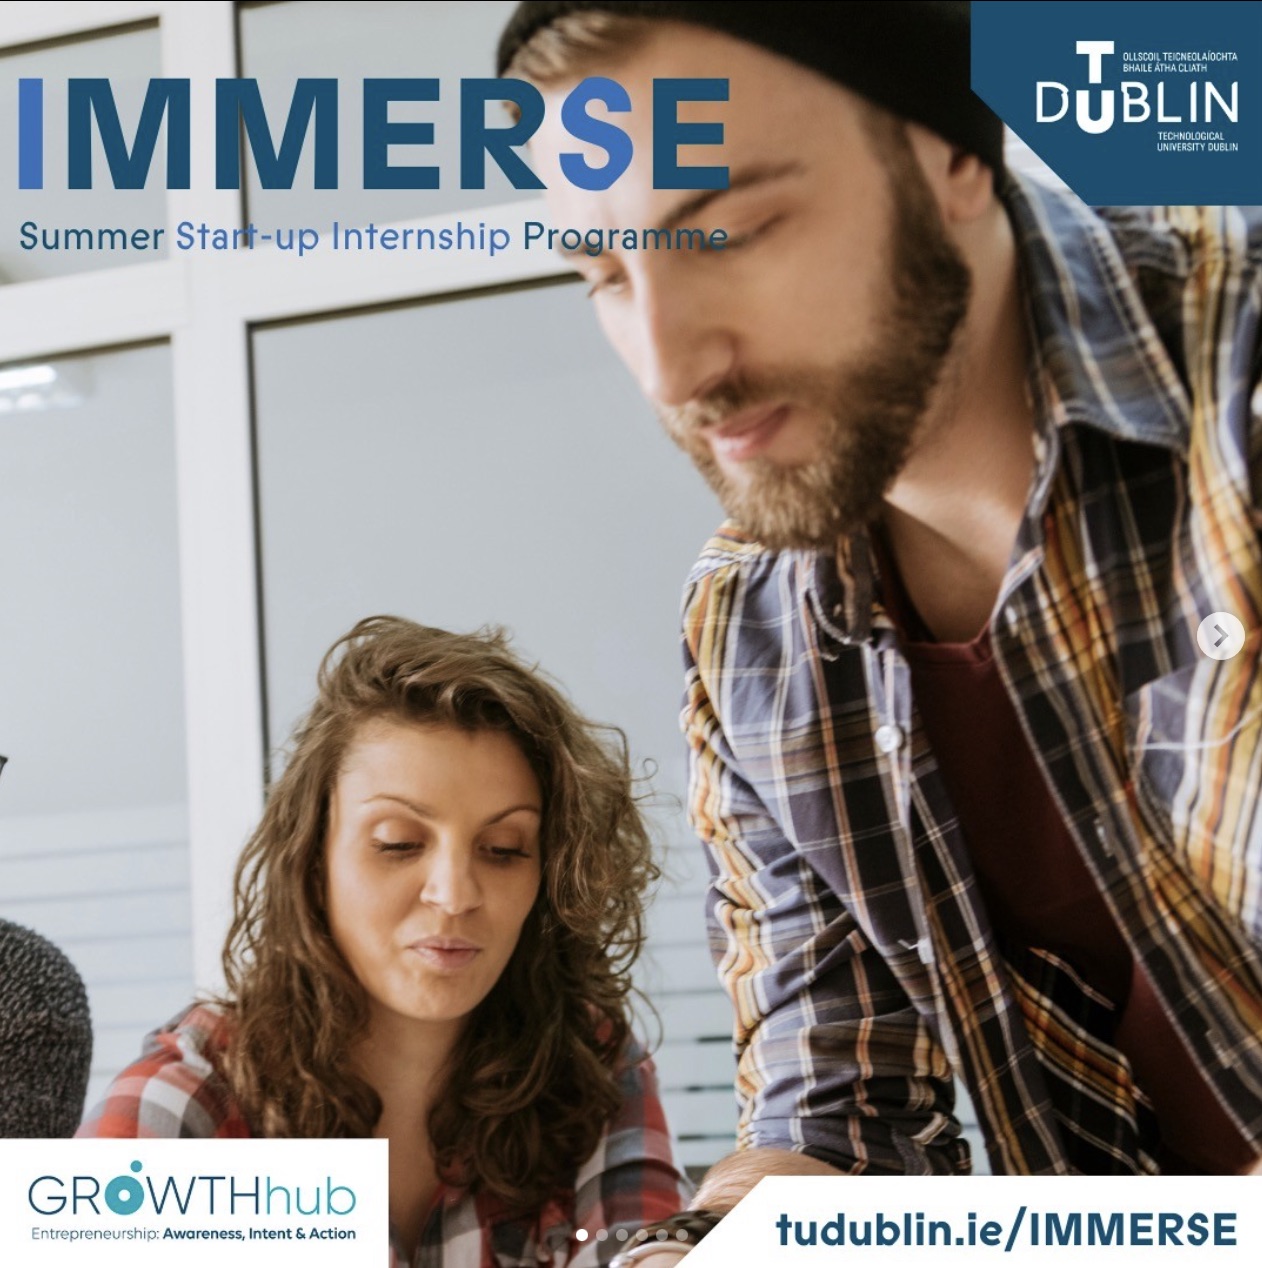 Image for News at GROWTHhub: 1 Start-up Summer Internships. 2 ClimateLaunchpad competition applications now opened. 3 Student Entrepreneurship Champions appointed. 4 TU Dublin Greenweek. 